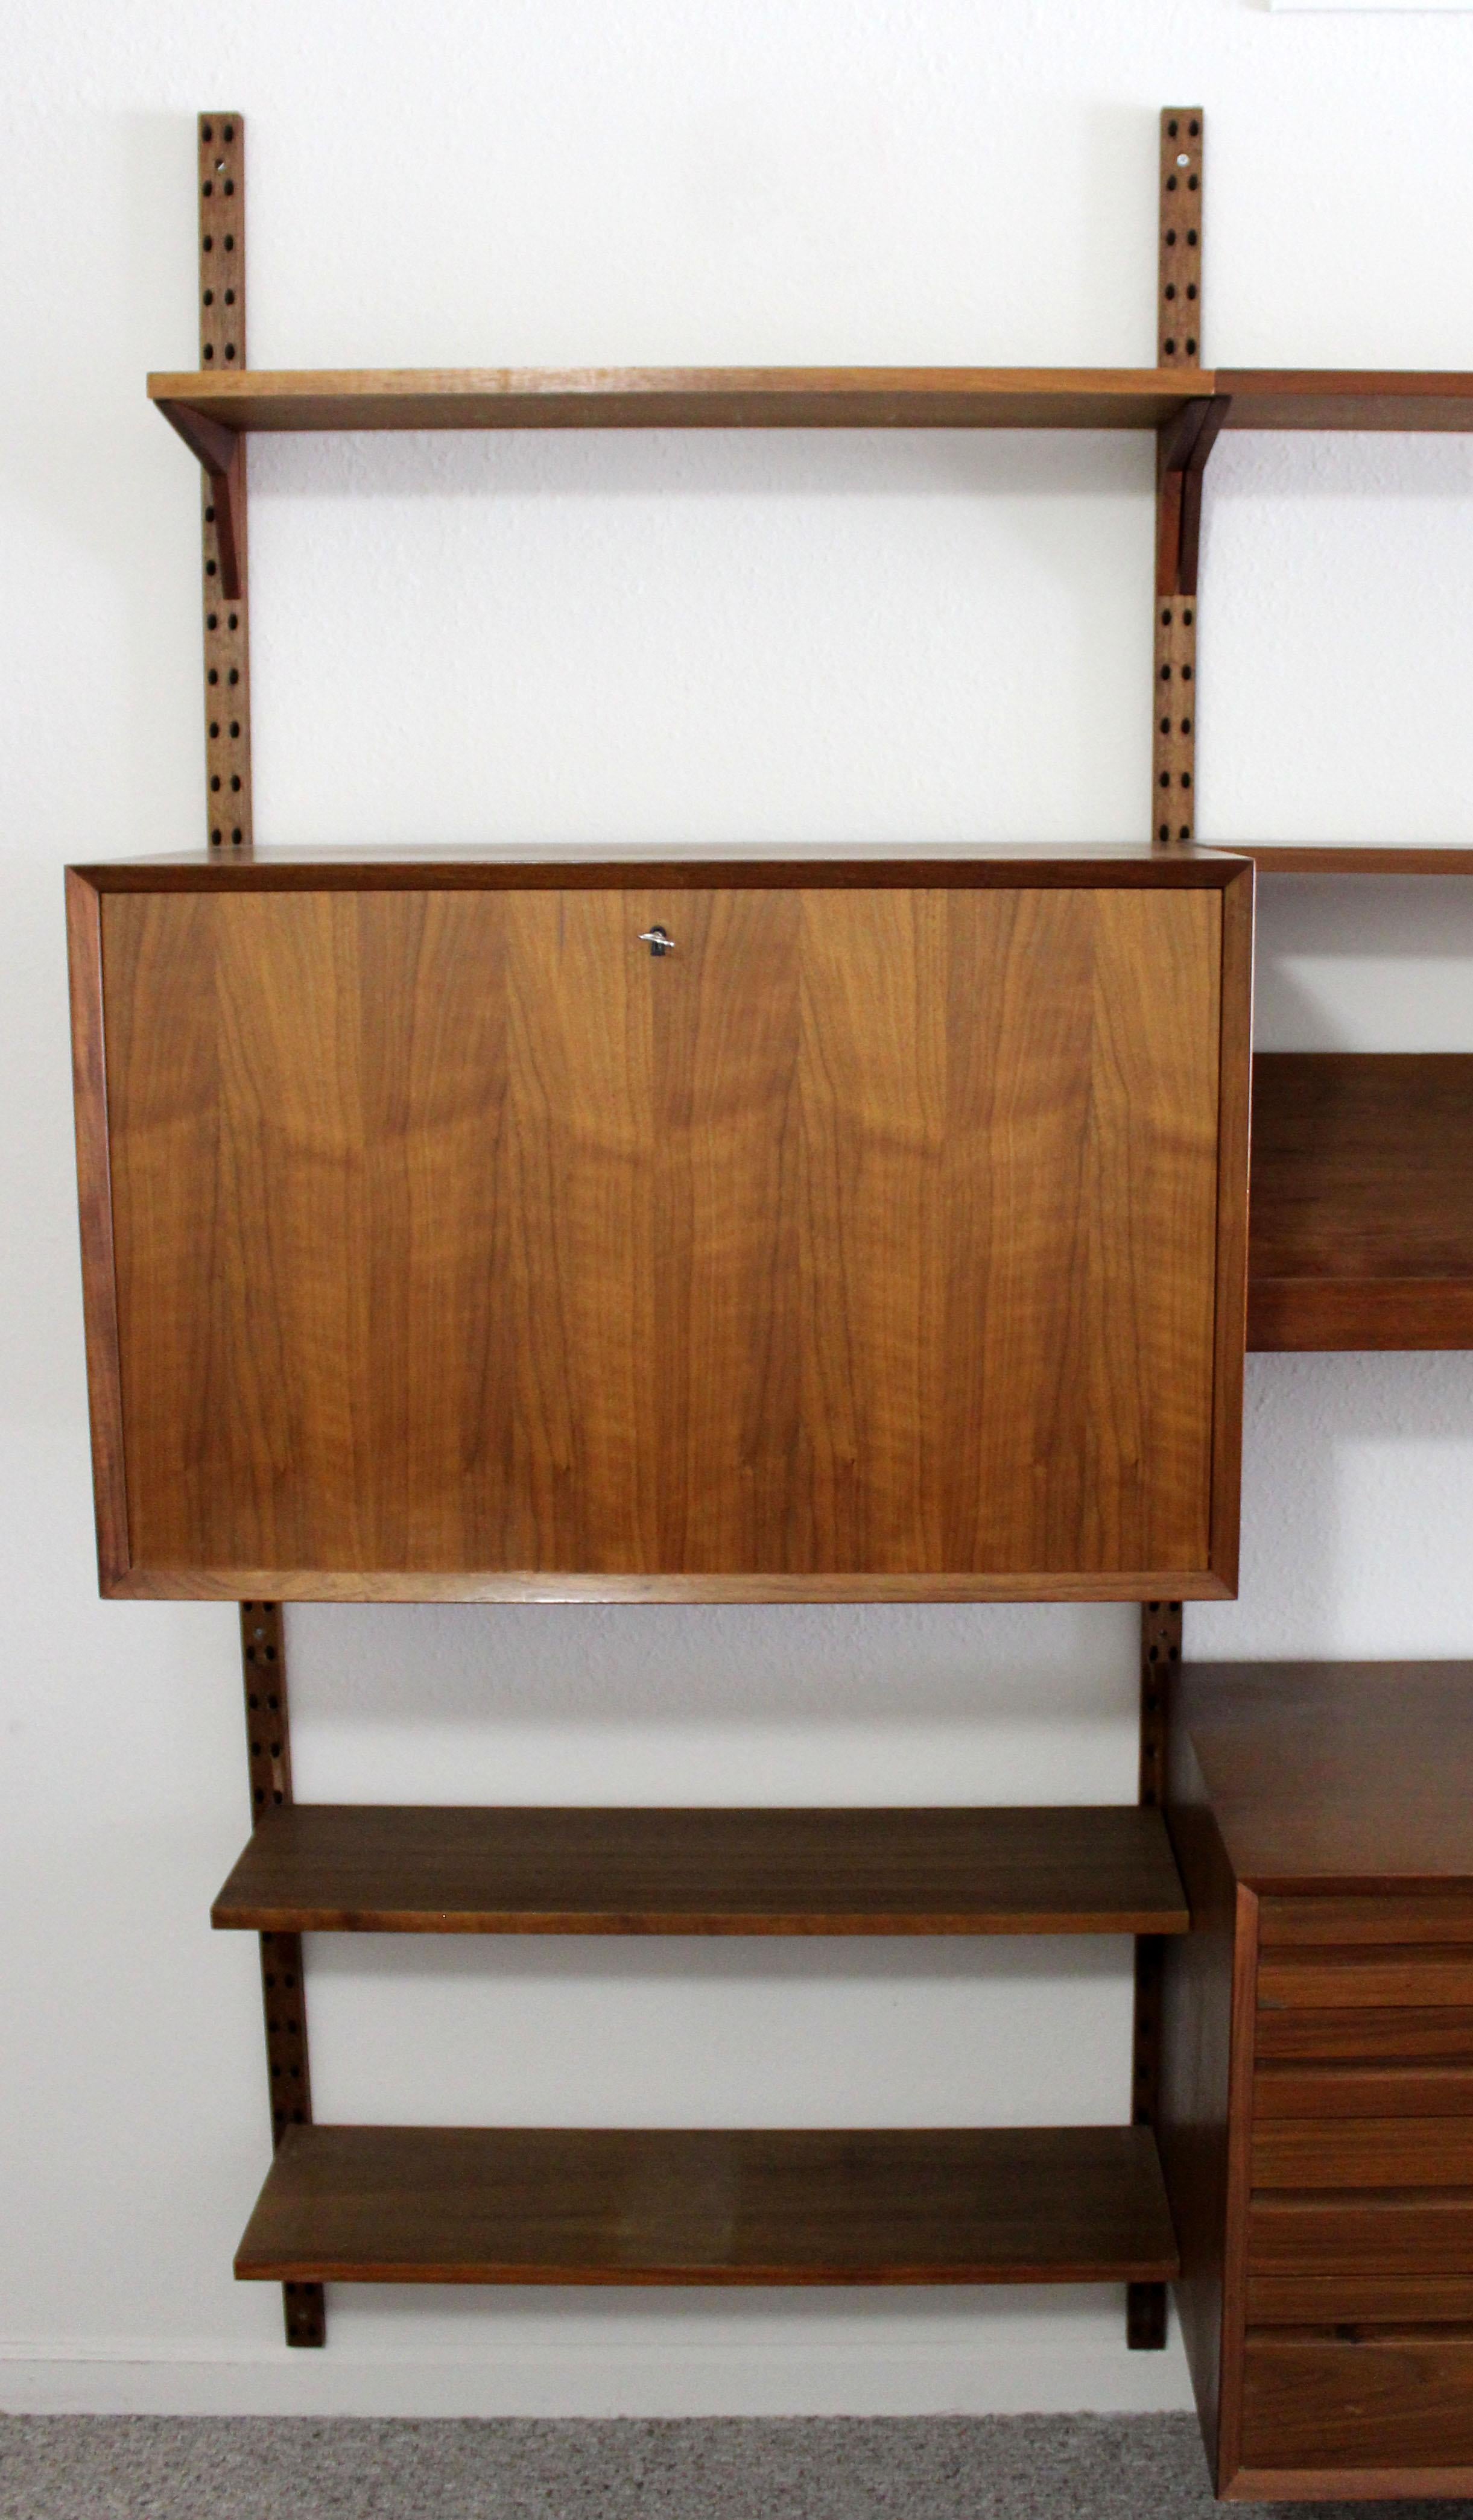 For your consideration is a magnificent, massive wall unit, made of walnut, with three cupboards and eight shelves by Founders, circa 1960s. In excellent condition. The dimensions are 127.5